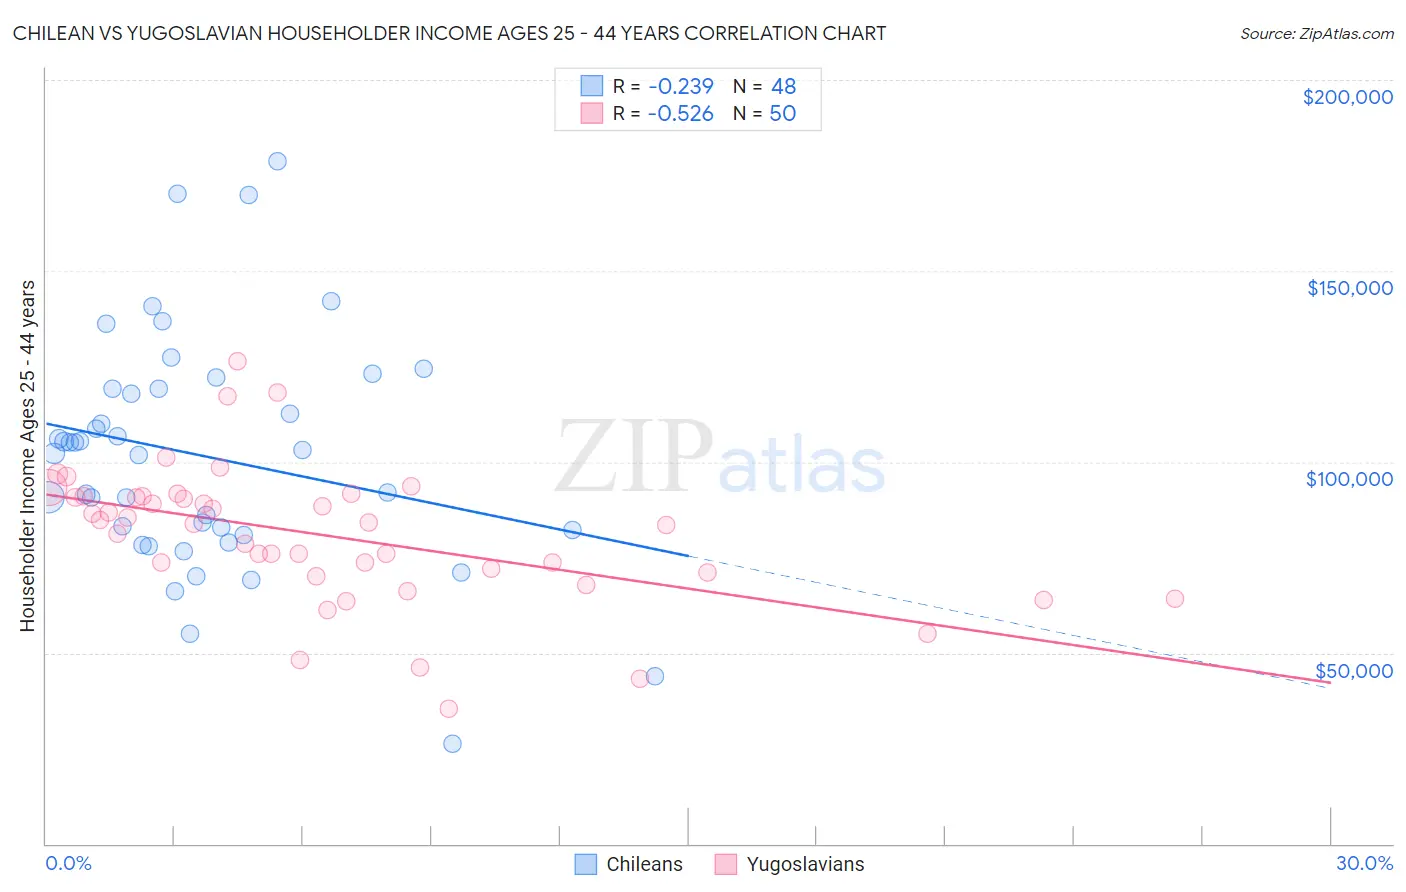 Chilean vs Yugoslavian Householder Income Ages 25 - 44 years